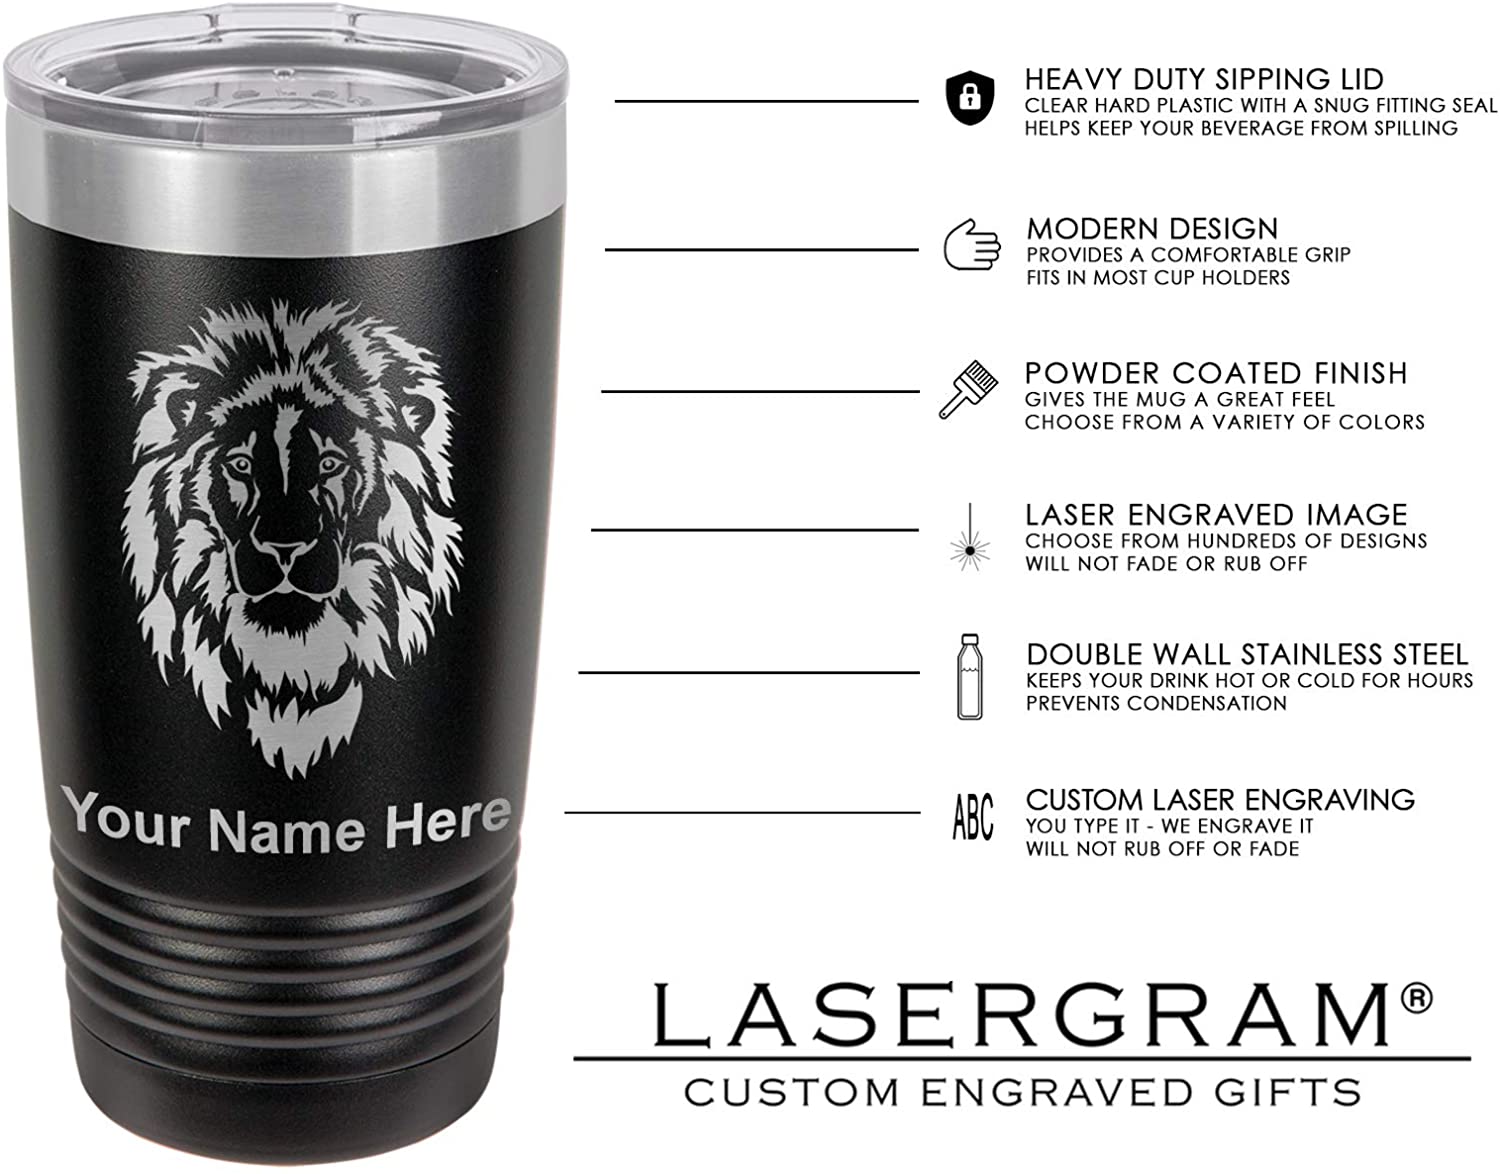 The 4 Best Laser Engravers for Tumblers, Cups, & Mugs in 2022